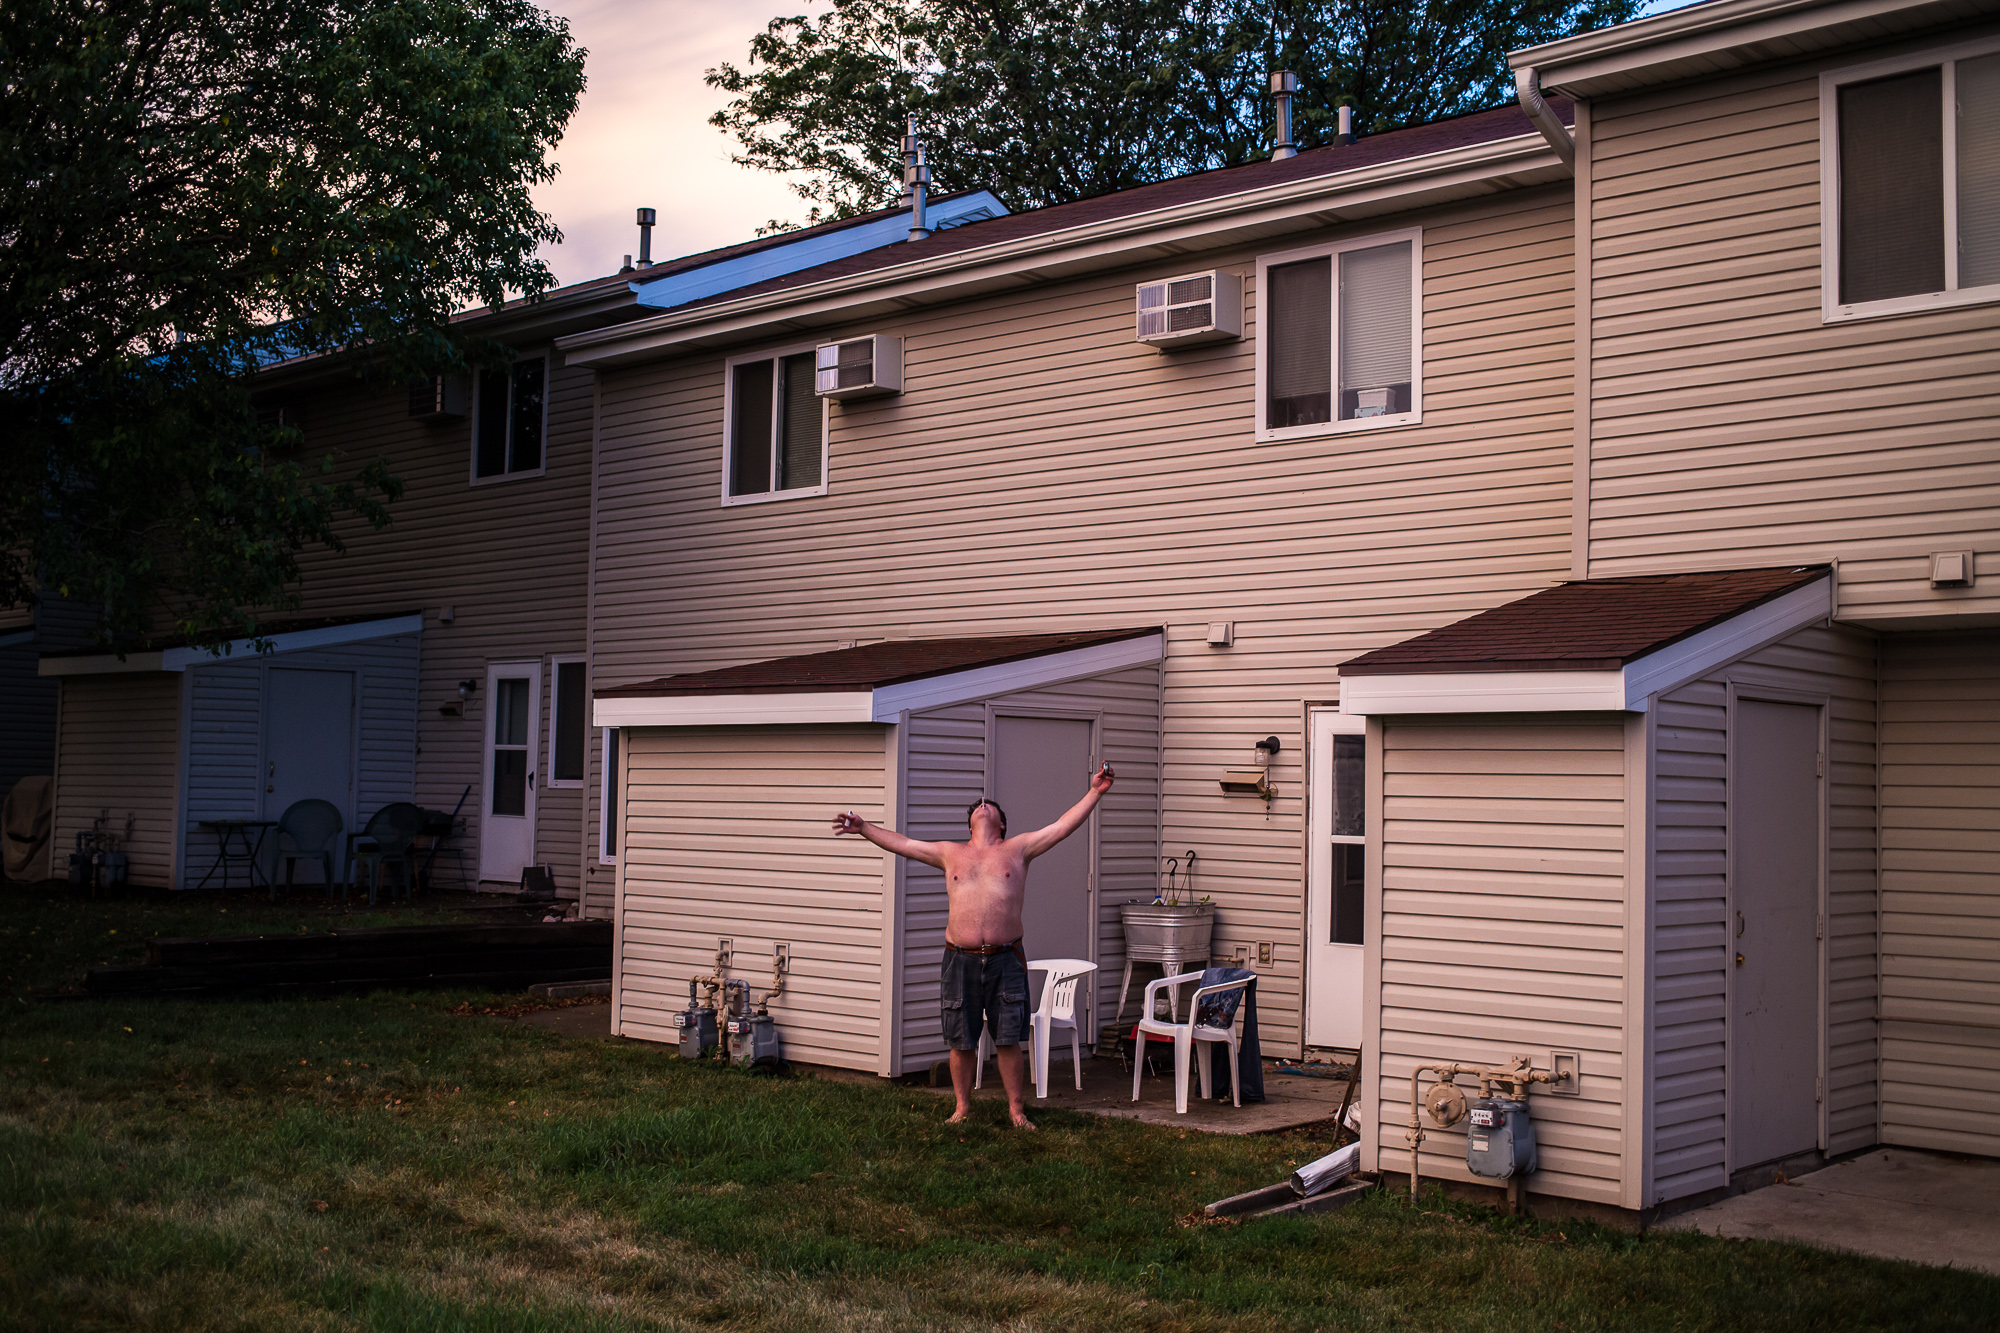  Tony Rexroat enjoys the evening air on Monday, July 22, 2013 in Webster City, IA. 